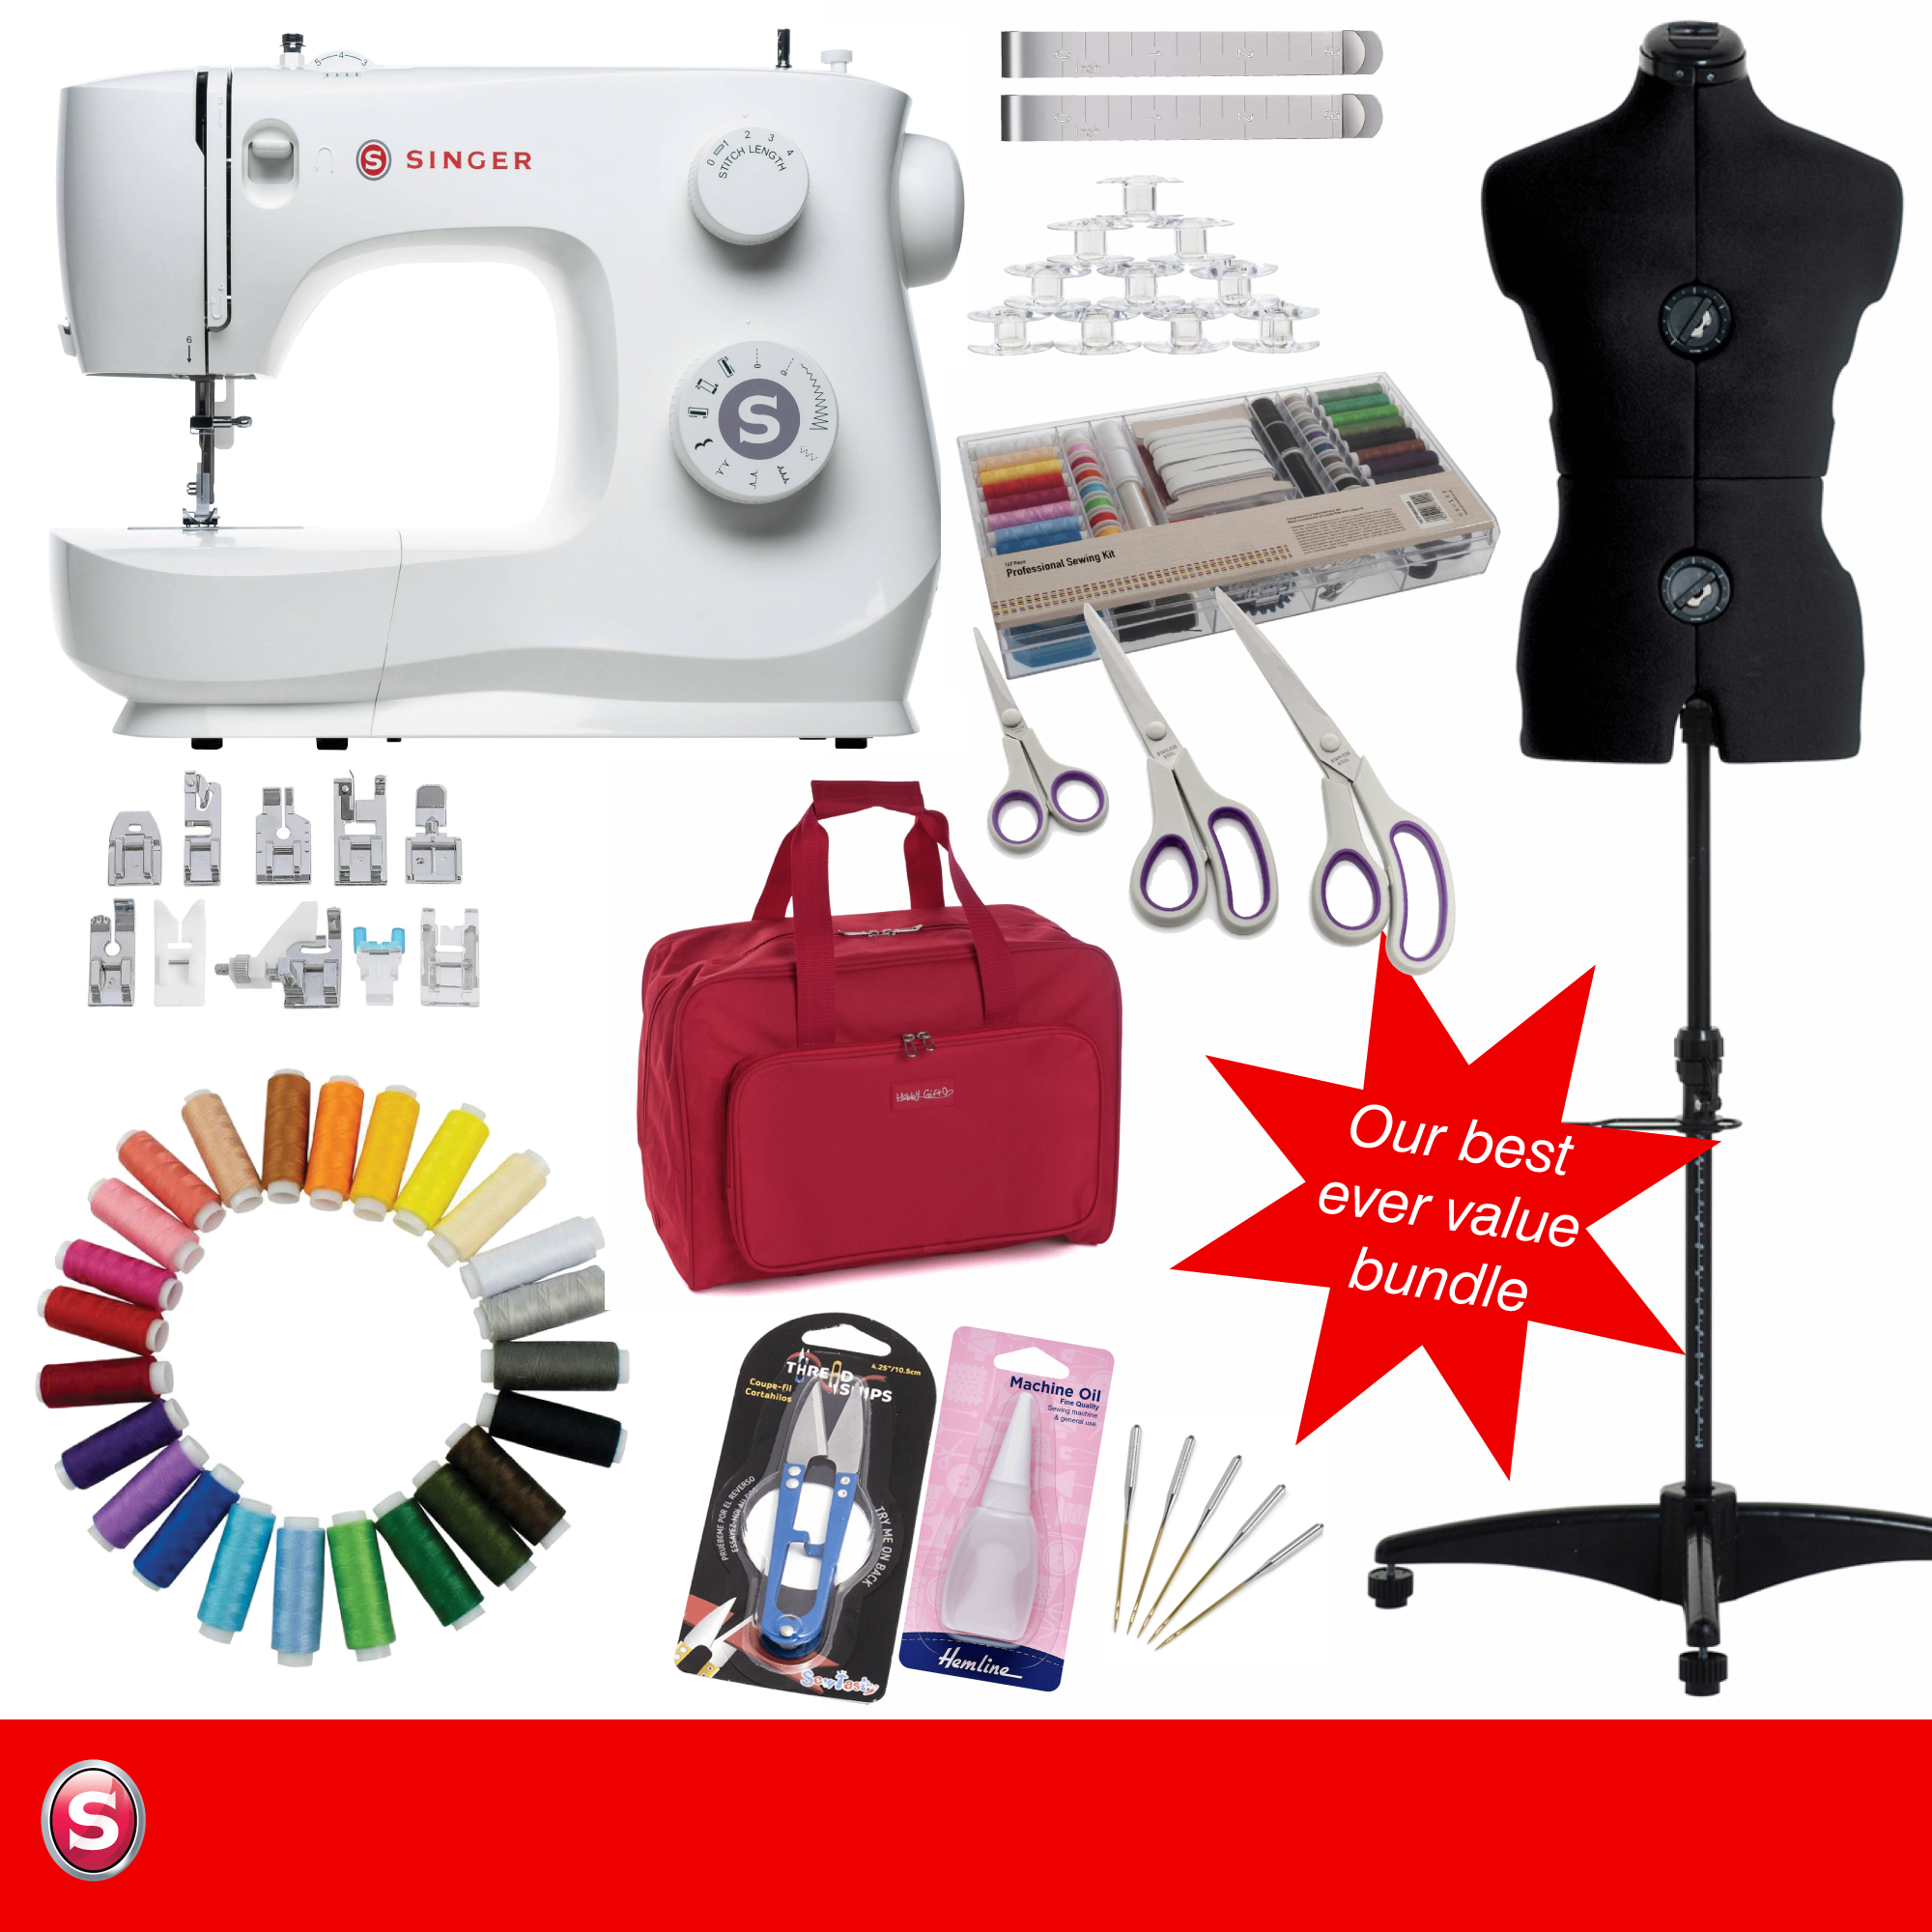 Singer Sewing Room Bundle - Sewing Machine, Mannequin and Accessories - 3 options to choose from